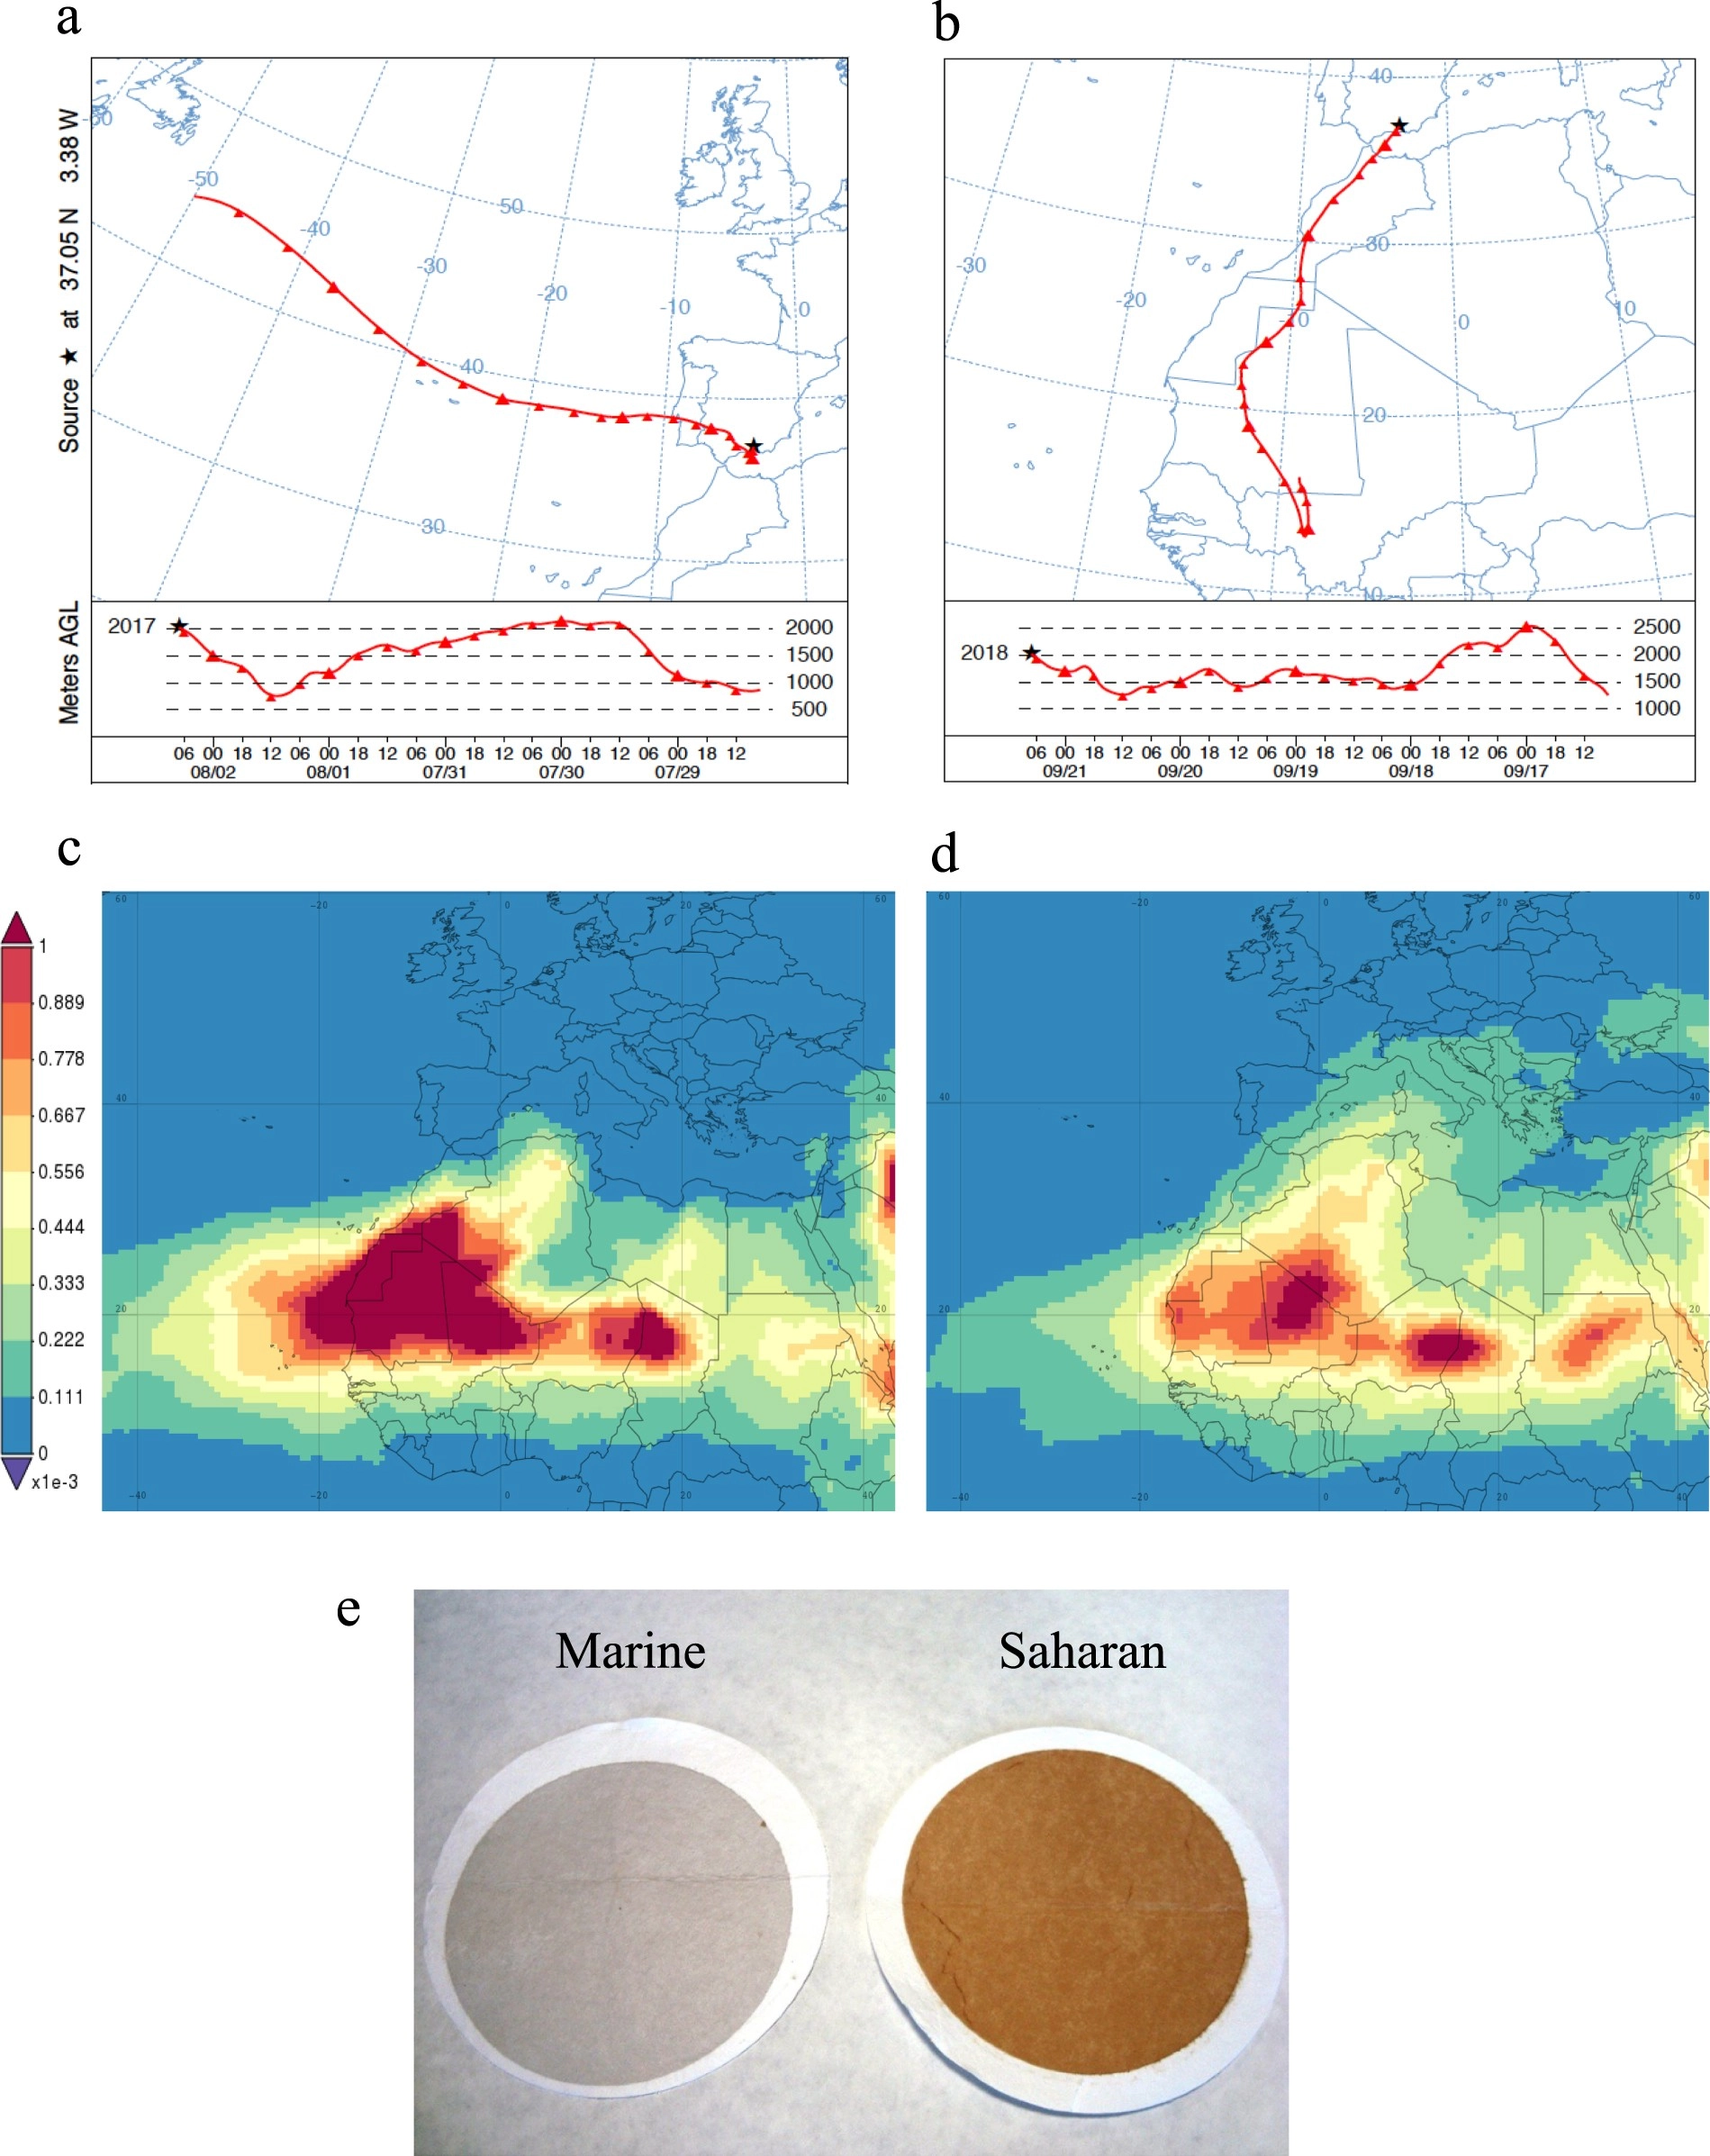 Deposition rates of viruses and bacteria above the atmospheric boundary layer